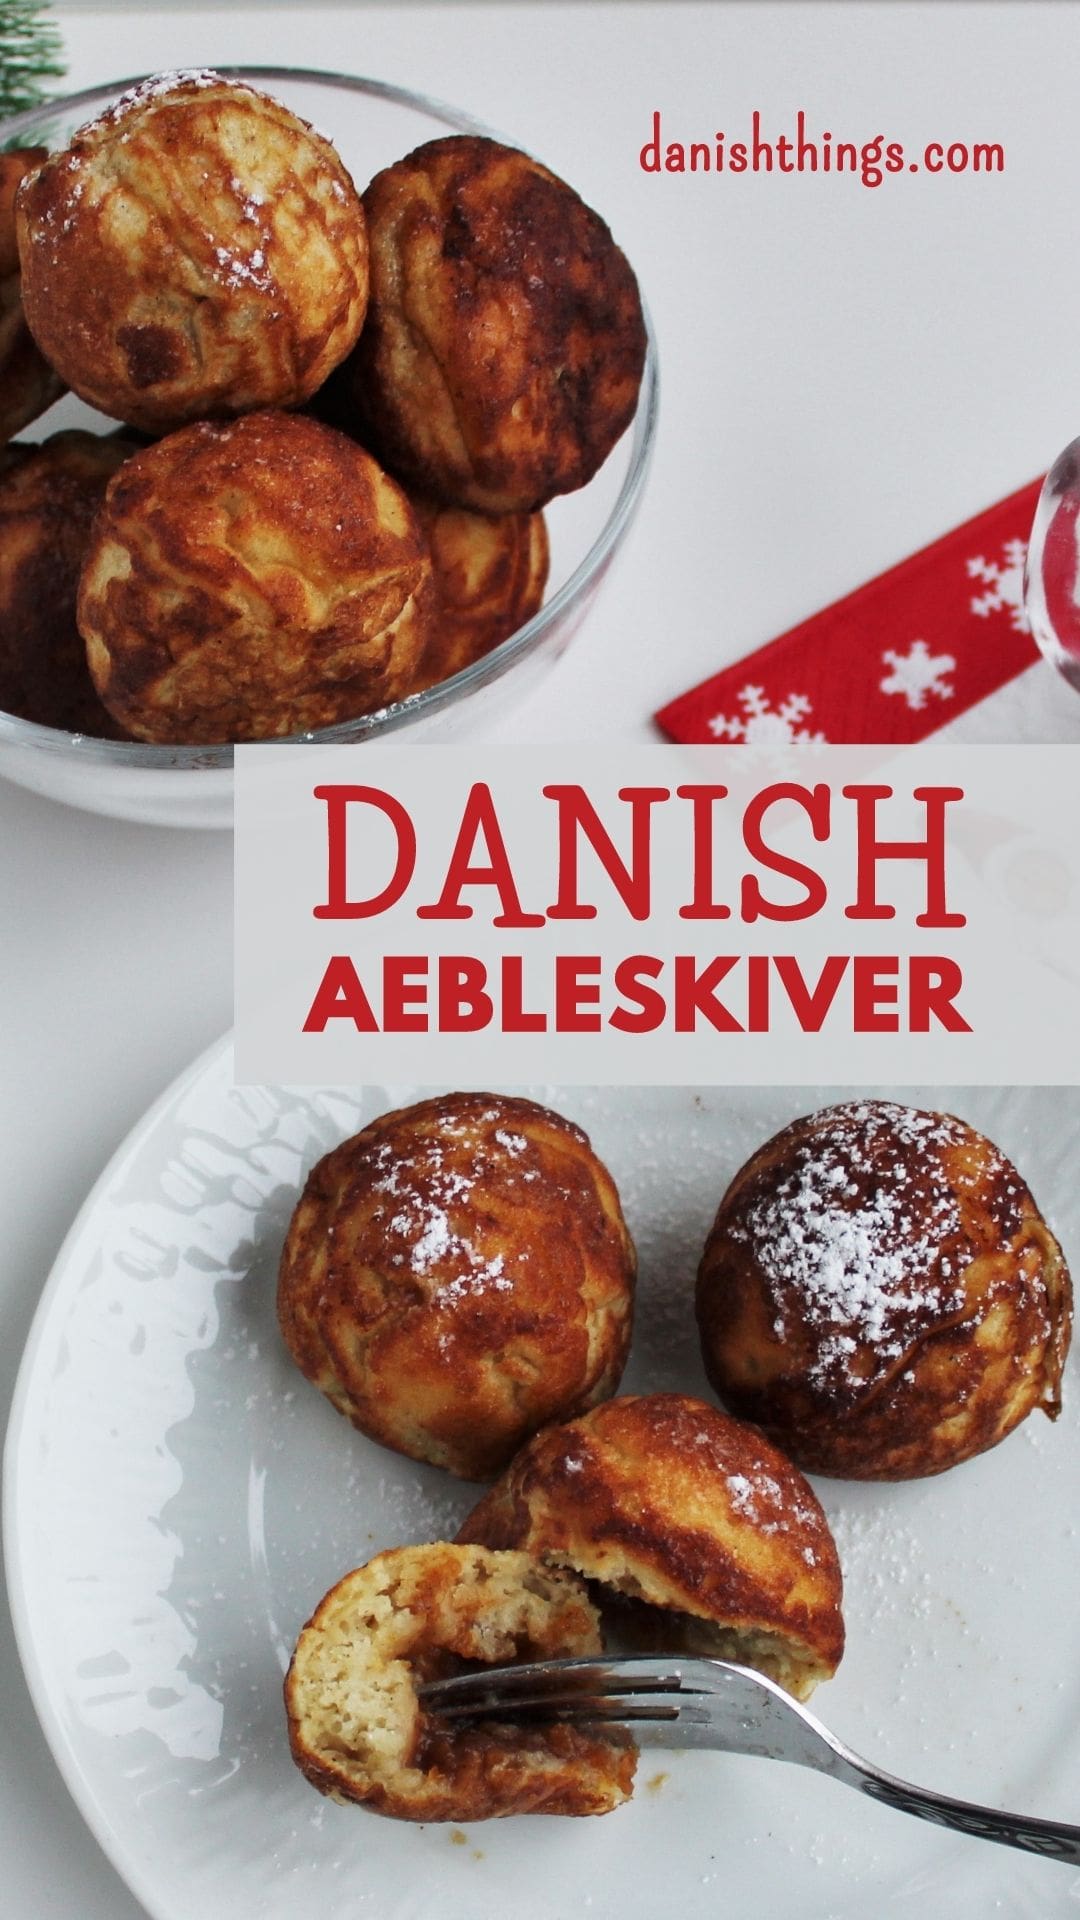 Aebleskiver - Puff dumplings - Apple dumplings - Filled pancakes - Pancake balls – in Danish æbleskiver. The most delicious filled aebleskiver. Danes eat them at Christmastime – you can eat them whenever you like. Fill your aebleskiver with apple compote, jam, marmalade or with extra batter and have nice round aebleskiver. Eat them as they are or serve them with sugar and marmalade. Find the recipe and inspiration for your Danish inspired Christmas @ danishthings.com #DanishThings # Aebleskiver #Puff-dumplings #Apple-dumplings #Filled-pancakes #Pancake-balls #round #pancakes #sweet #dumpling #Danish #æbleskiver #Christmas